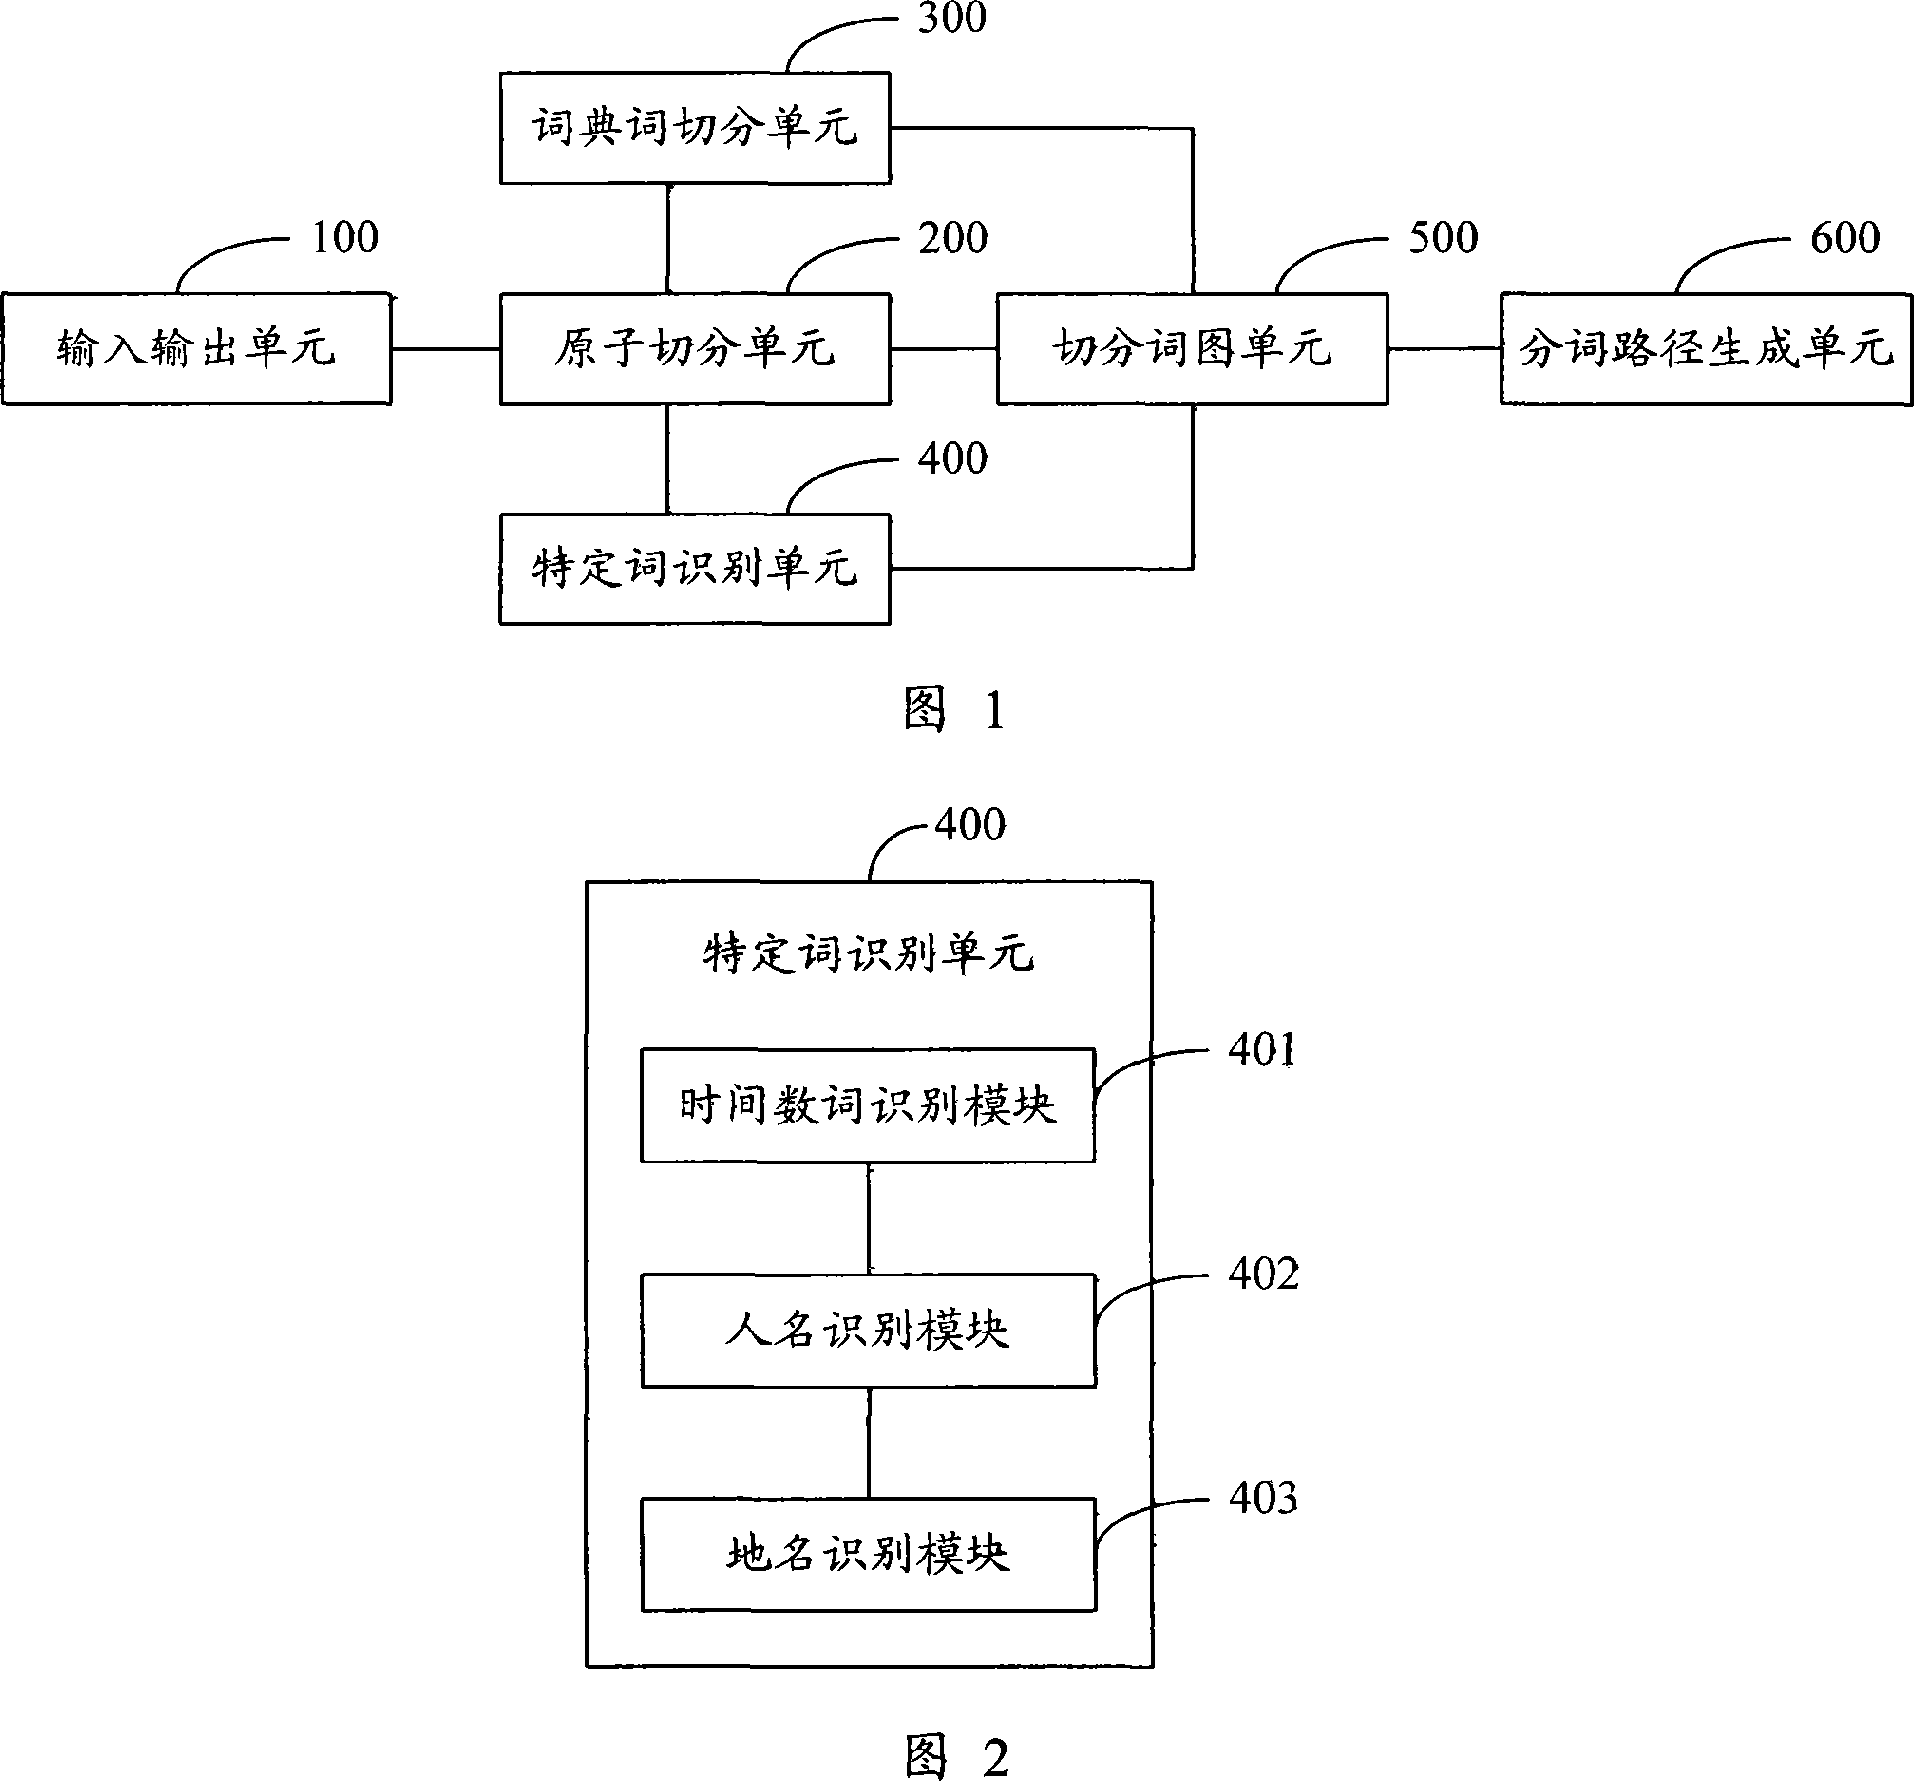 Method and system for dividing Chinese sentences